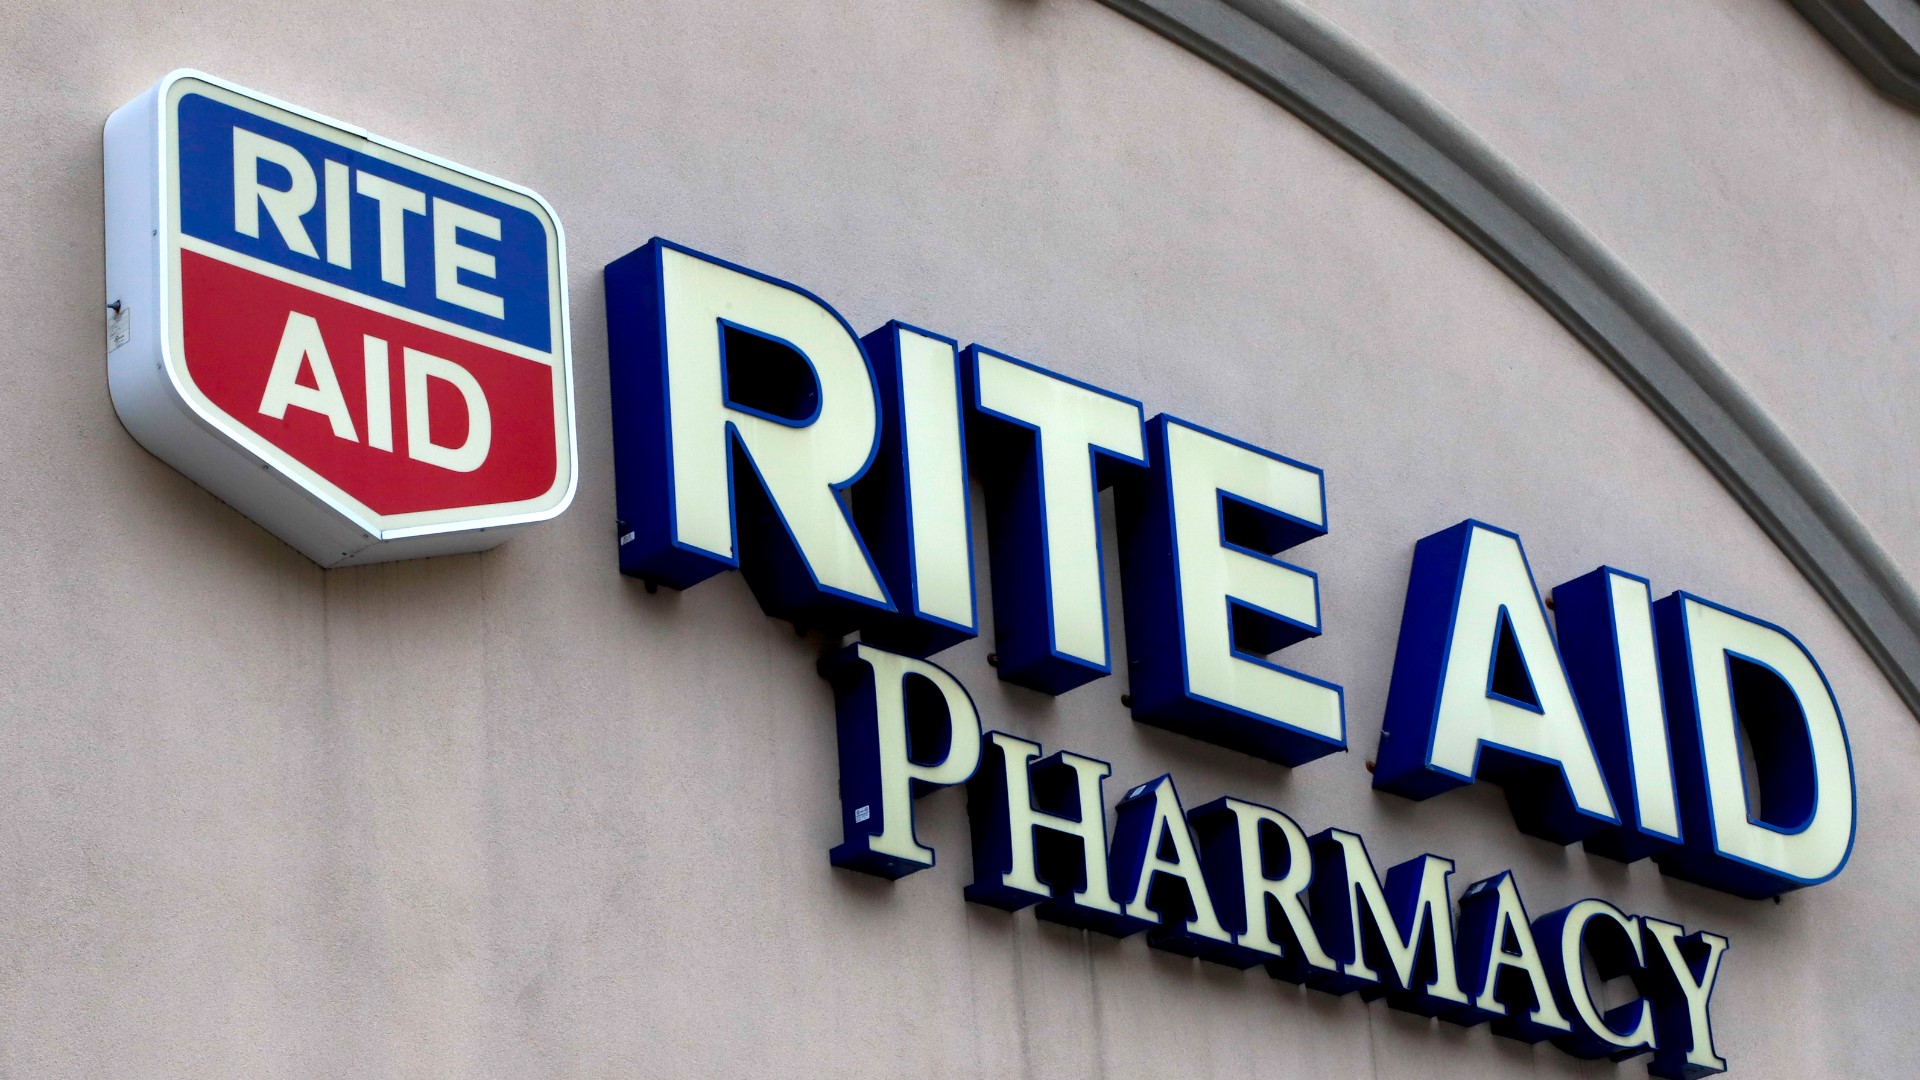 Research shows that Michigan's Rite Aid closure falls in line with others across the nation. Pharmacies are under pressure and not all of them can stay afloat.